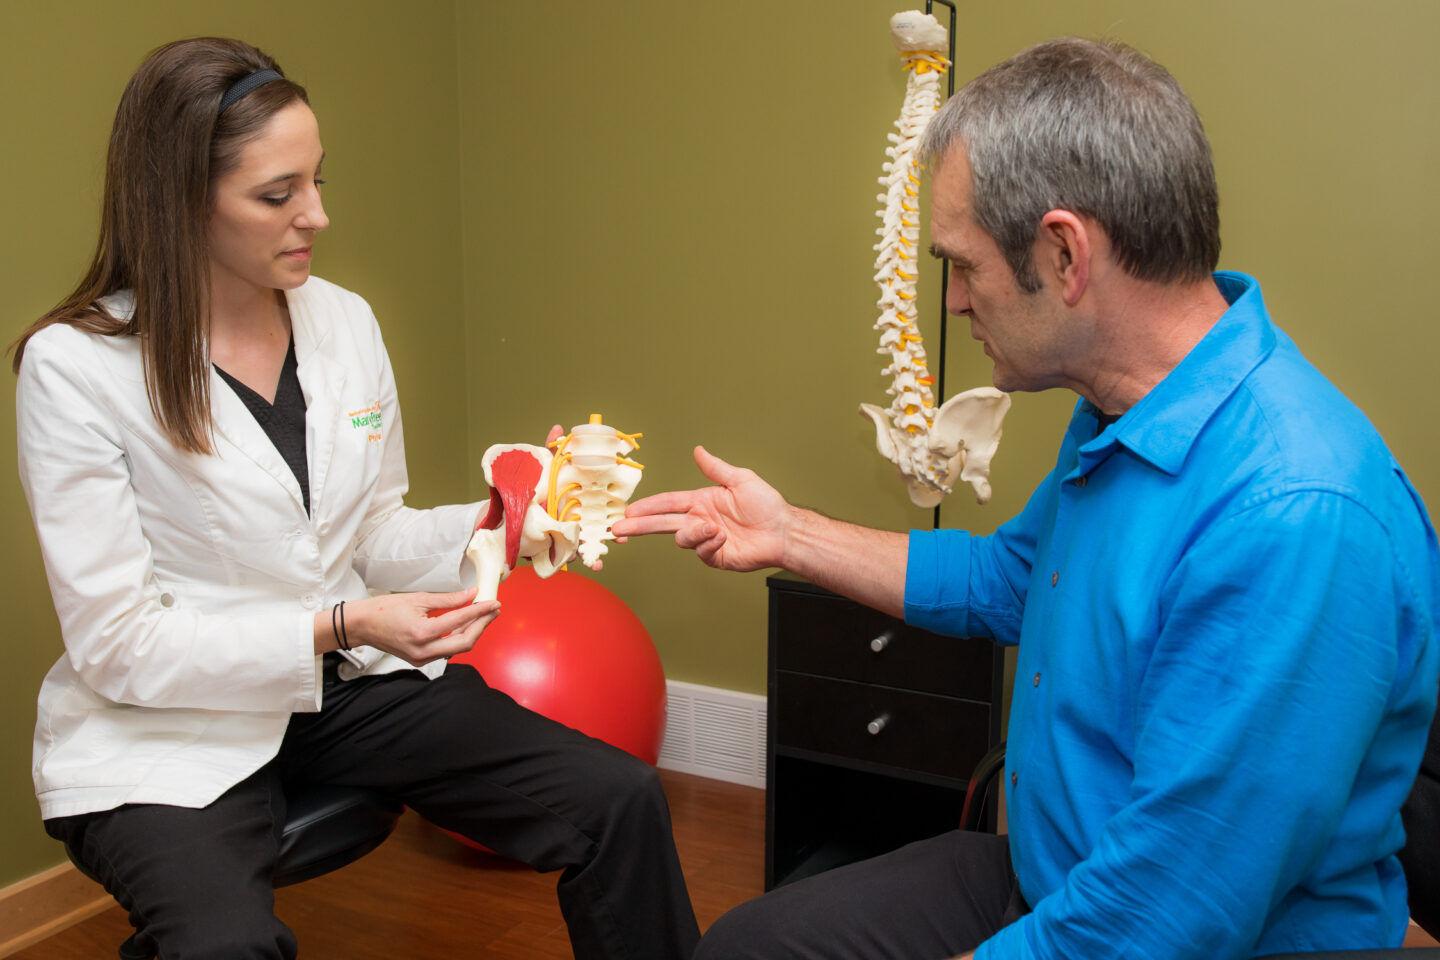 A physical therapist explains pelvic anatomy using a model to a patient.